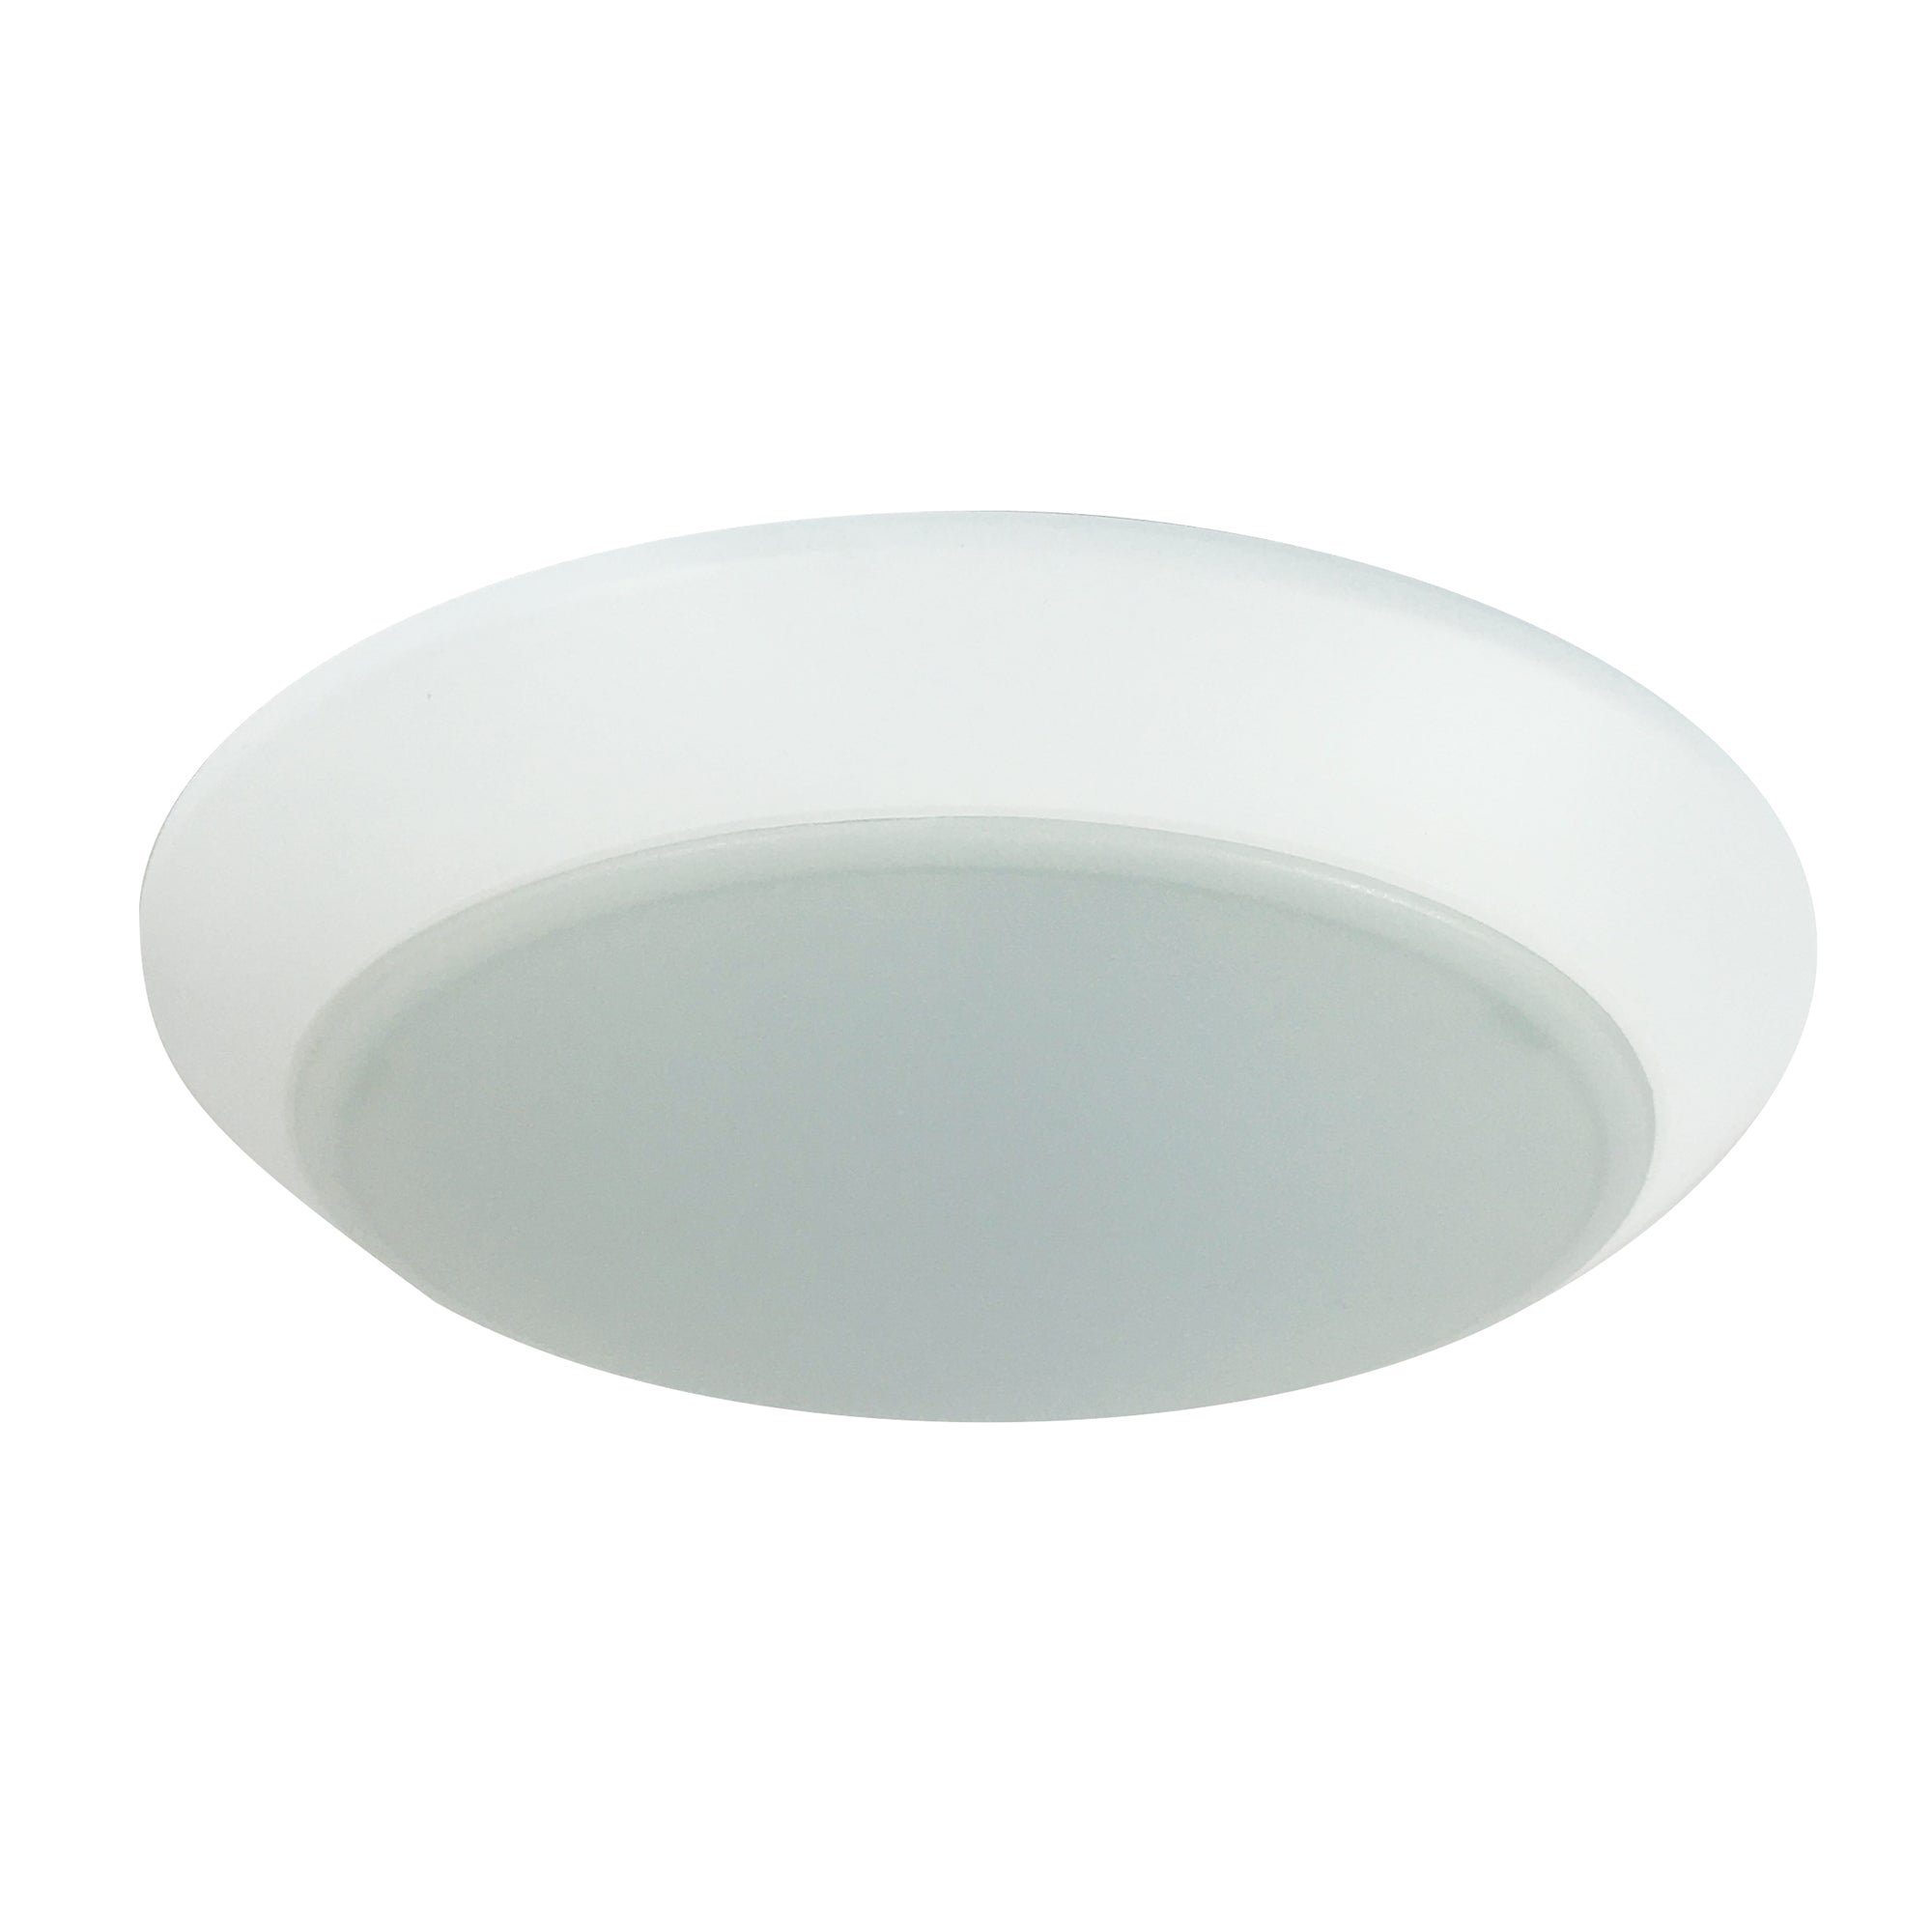 Nora Lighting NLOPAC-R8T2450W - Surface - 8 Inch AC Opal LED Surface Mount, 2150lm / 32W, 5000K, White finish